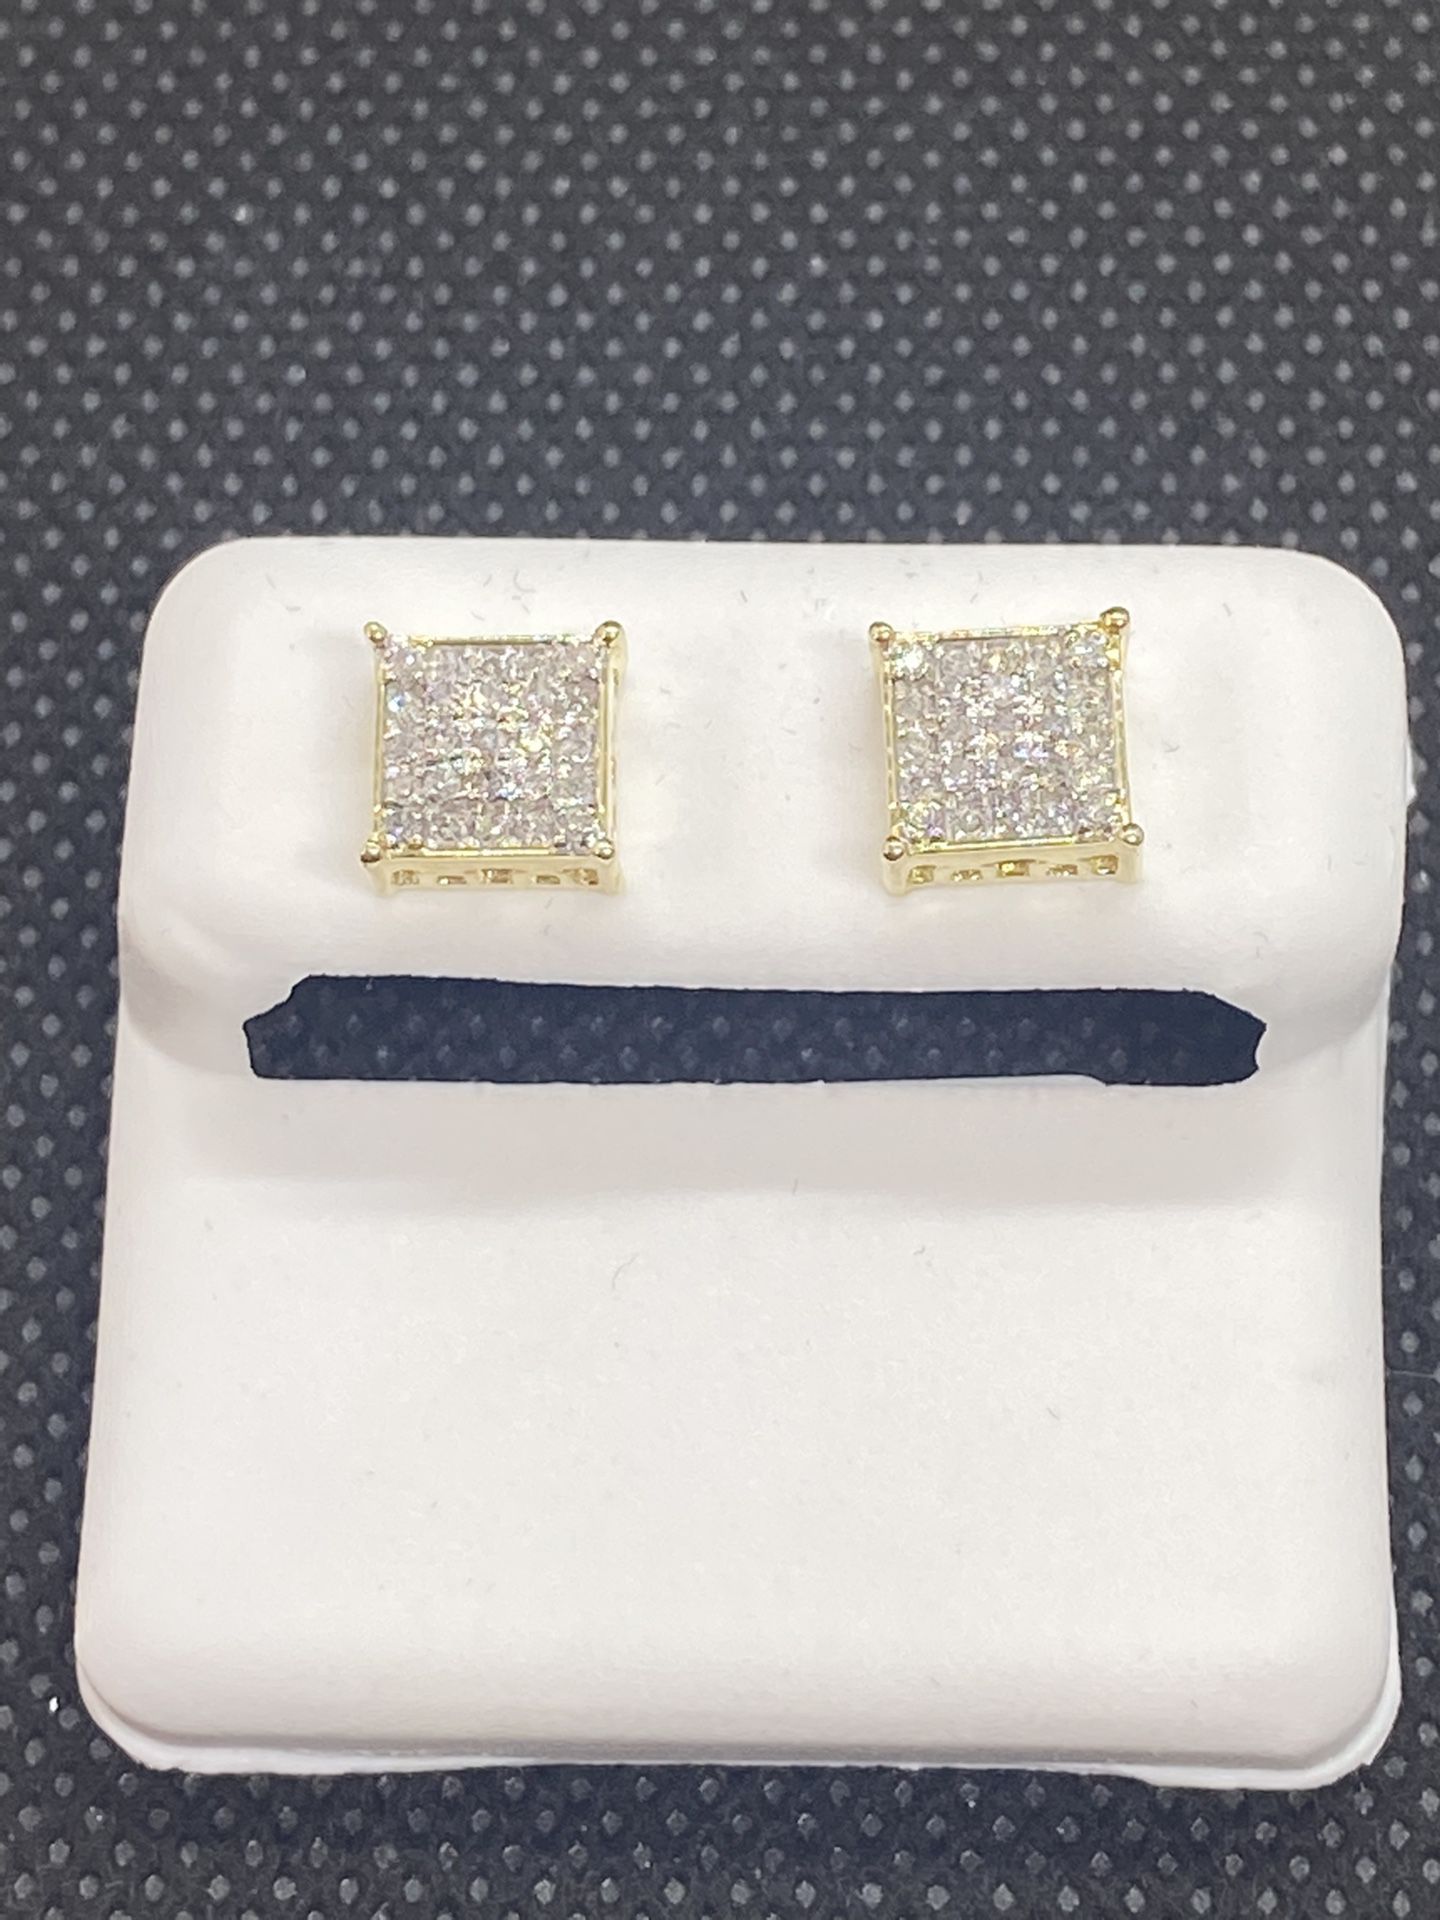 10KT GOLD AND DIAMOND EARRINGS OF 0.26 CTW AVAILABLE ON SPECIAL SALE 